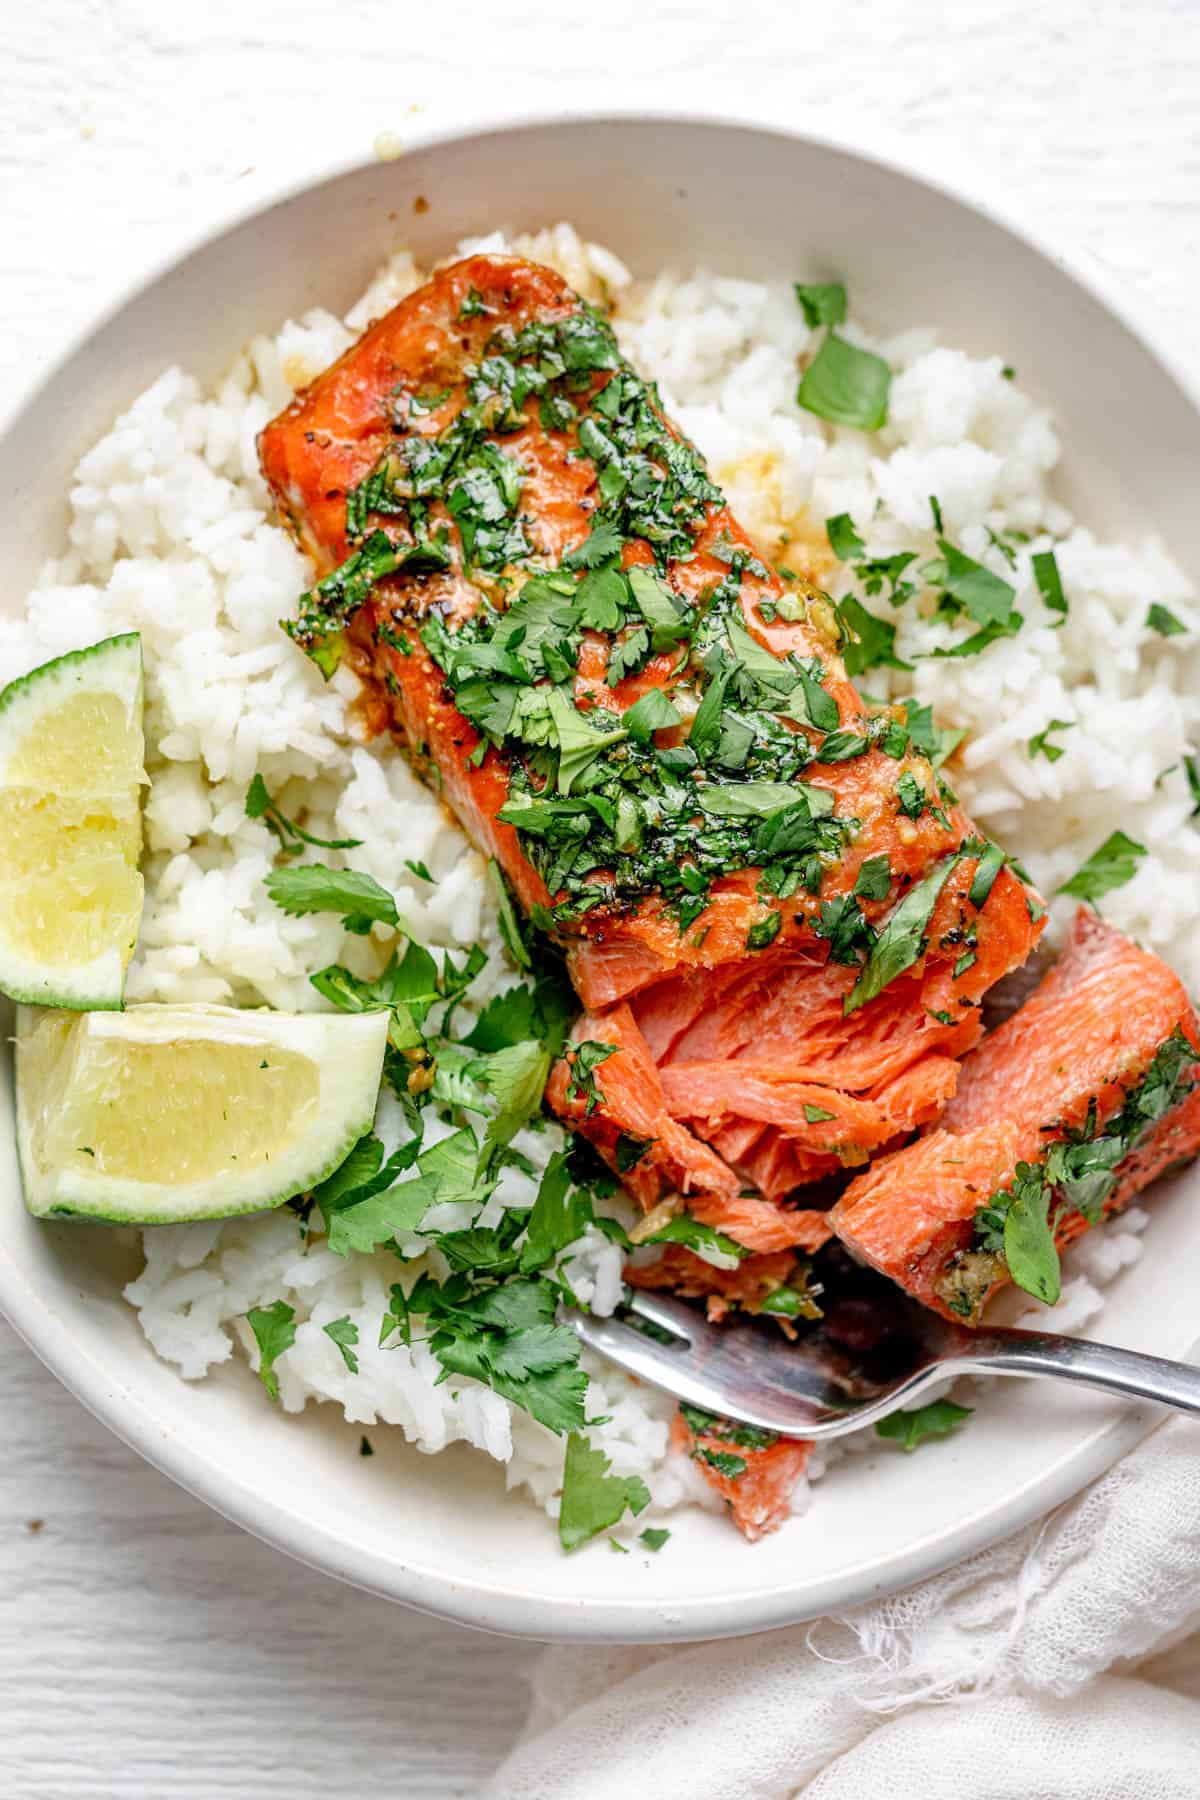 Cutting into the salmon to show how flaky it is, topped with lots of fresh cilantro over rice